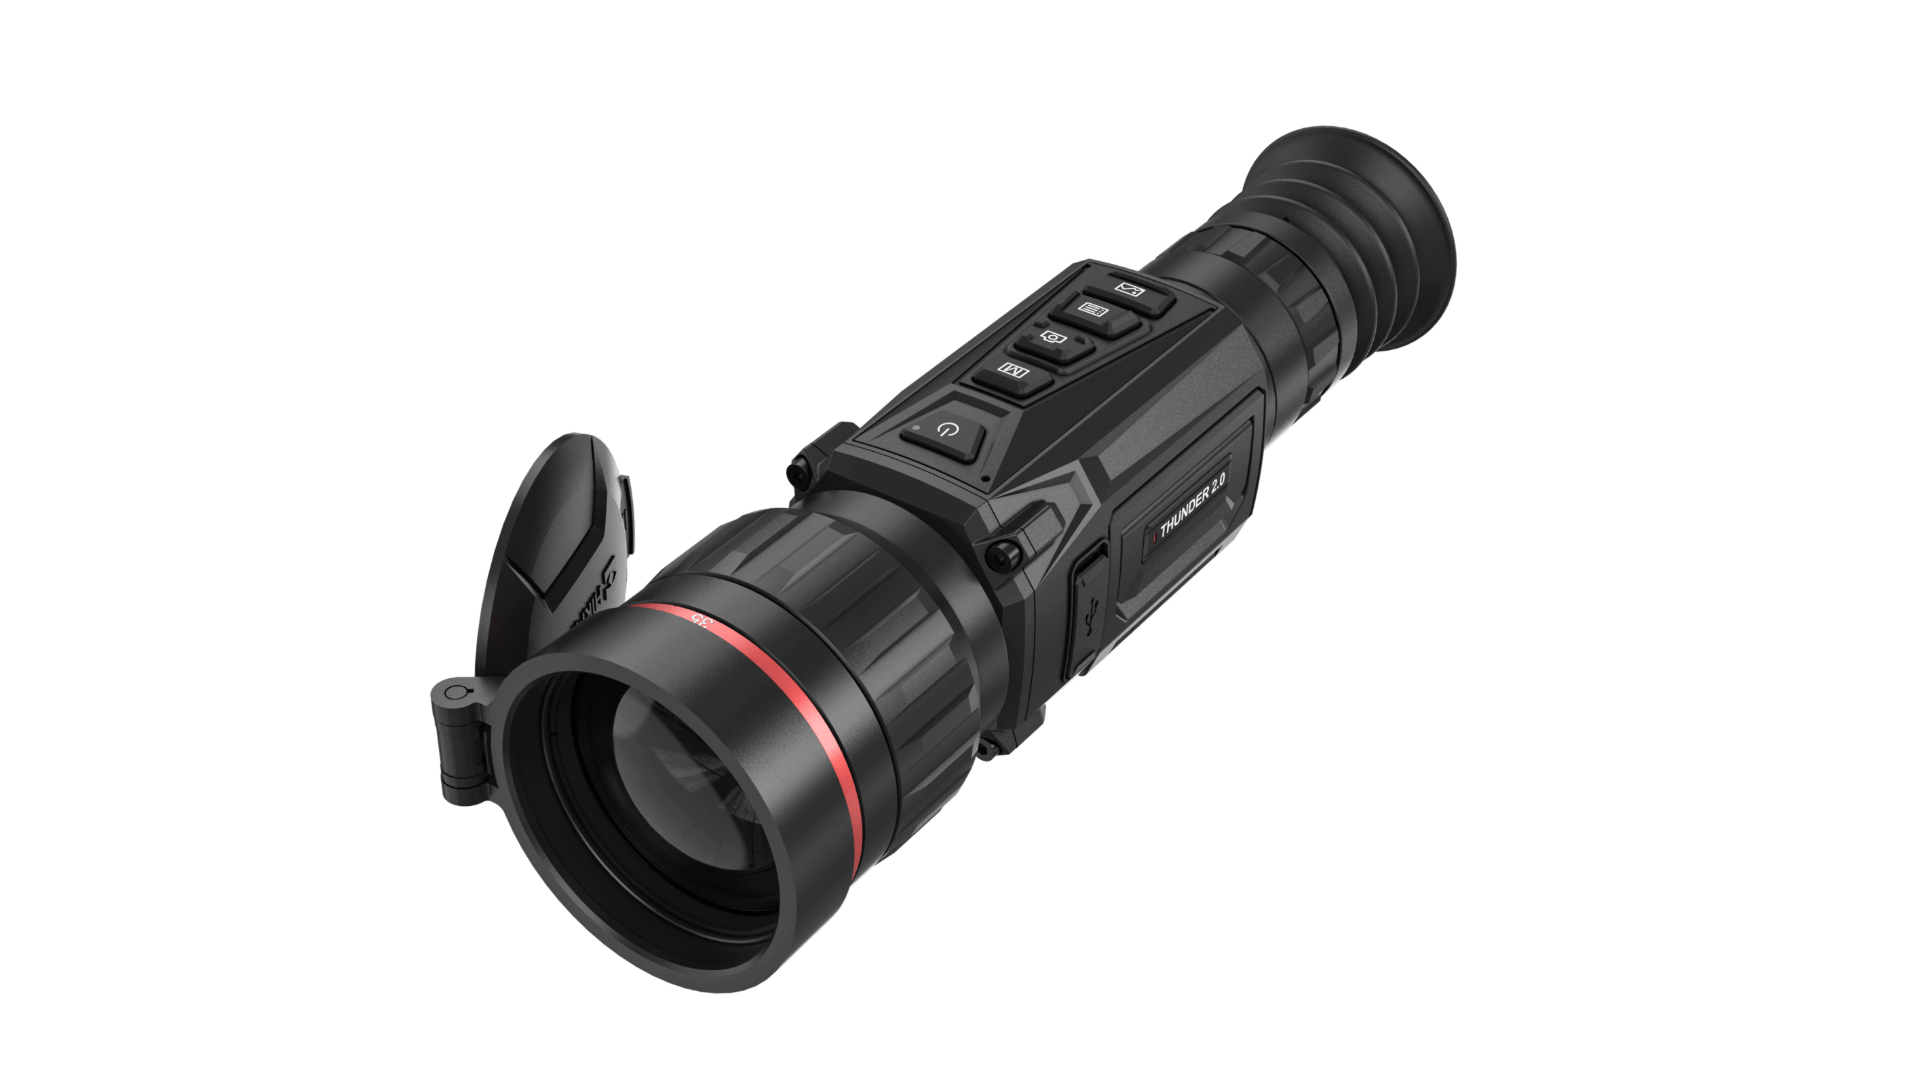 Load video: 360° view of precision with the HikMicro Thunder Zoom 2.0 Thermal Scope.